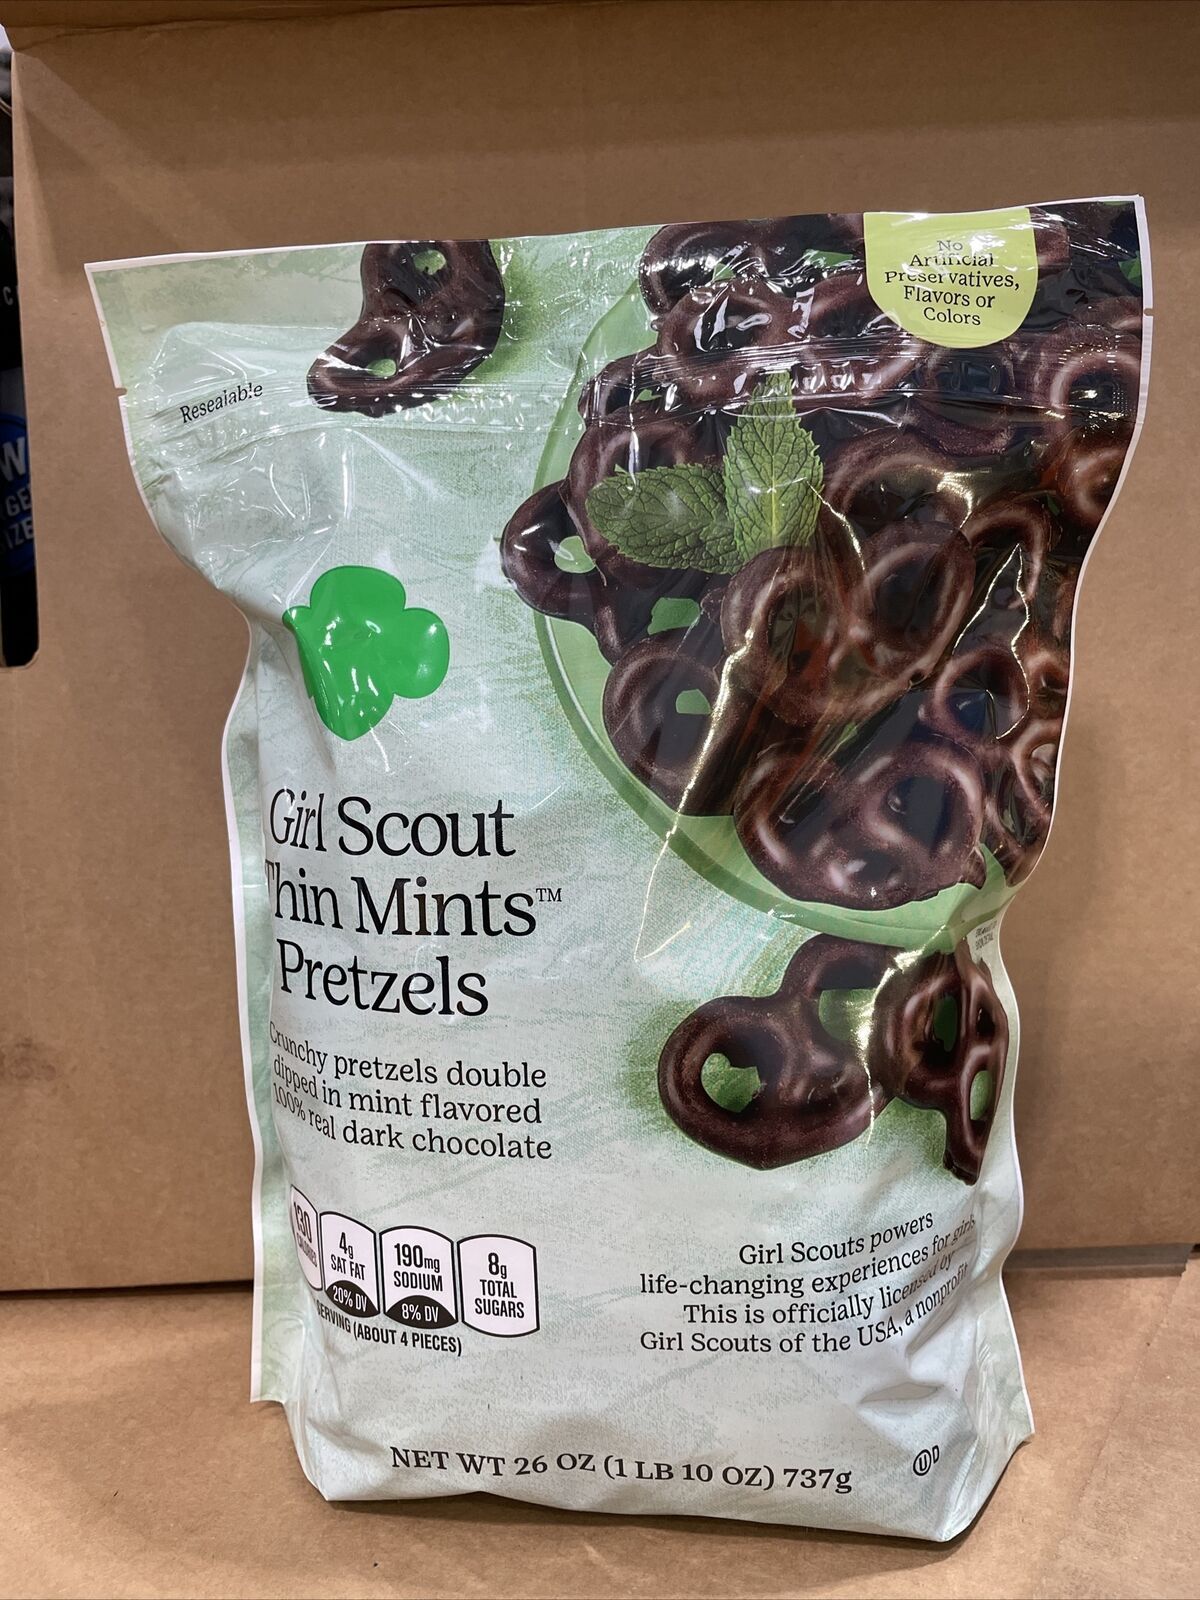 Primary image for Girl Scout Thin Mints Pretzels 100% Real Dark Chocolate, 26 Oz